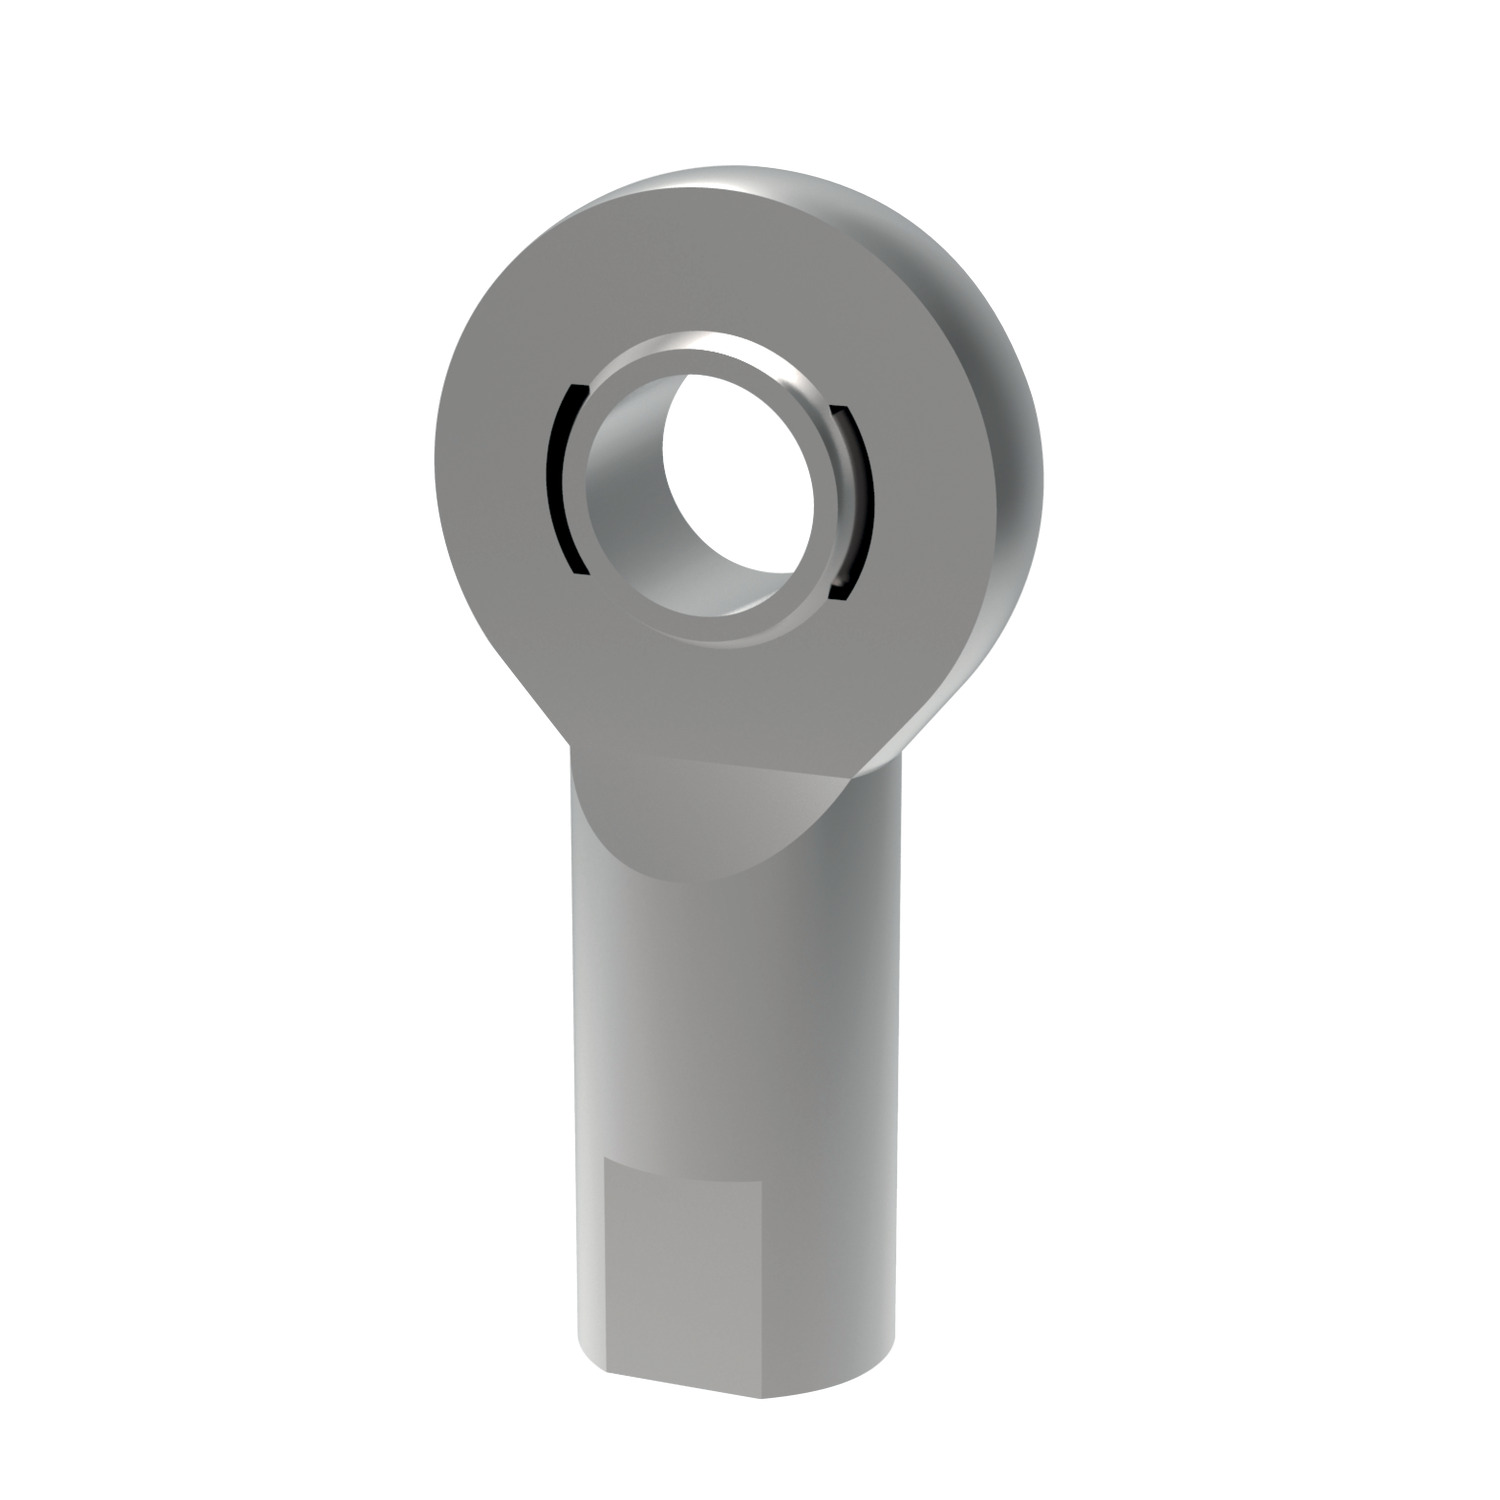 Stainless Heavy-Duty Rod Ends - Female Stainless steel heavy-duty female rod end – E series.